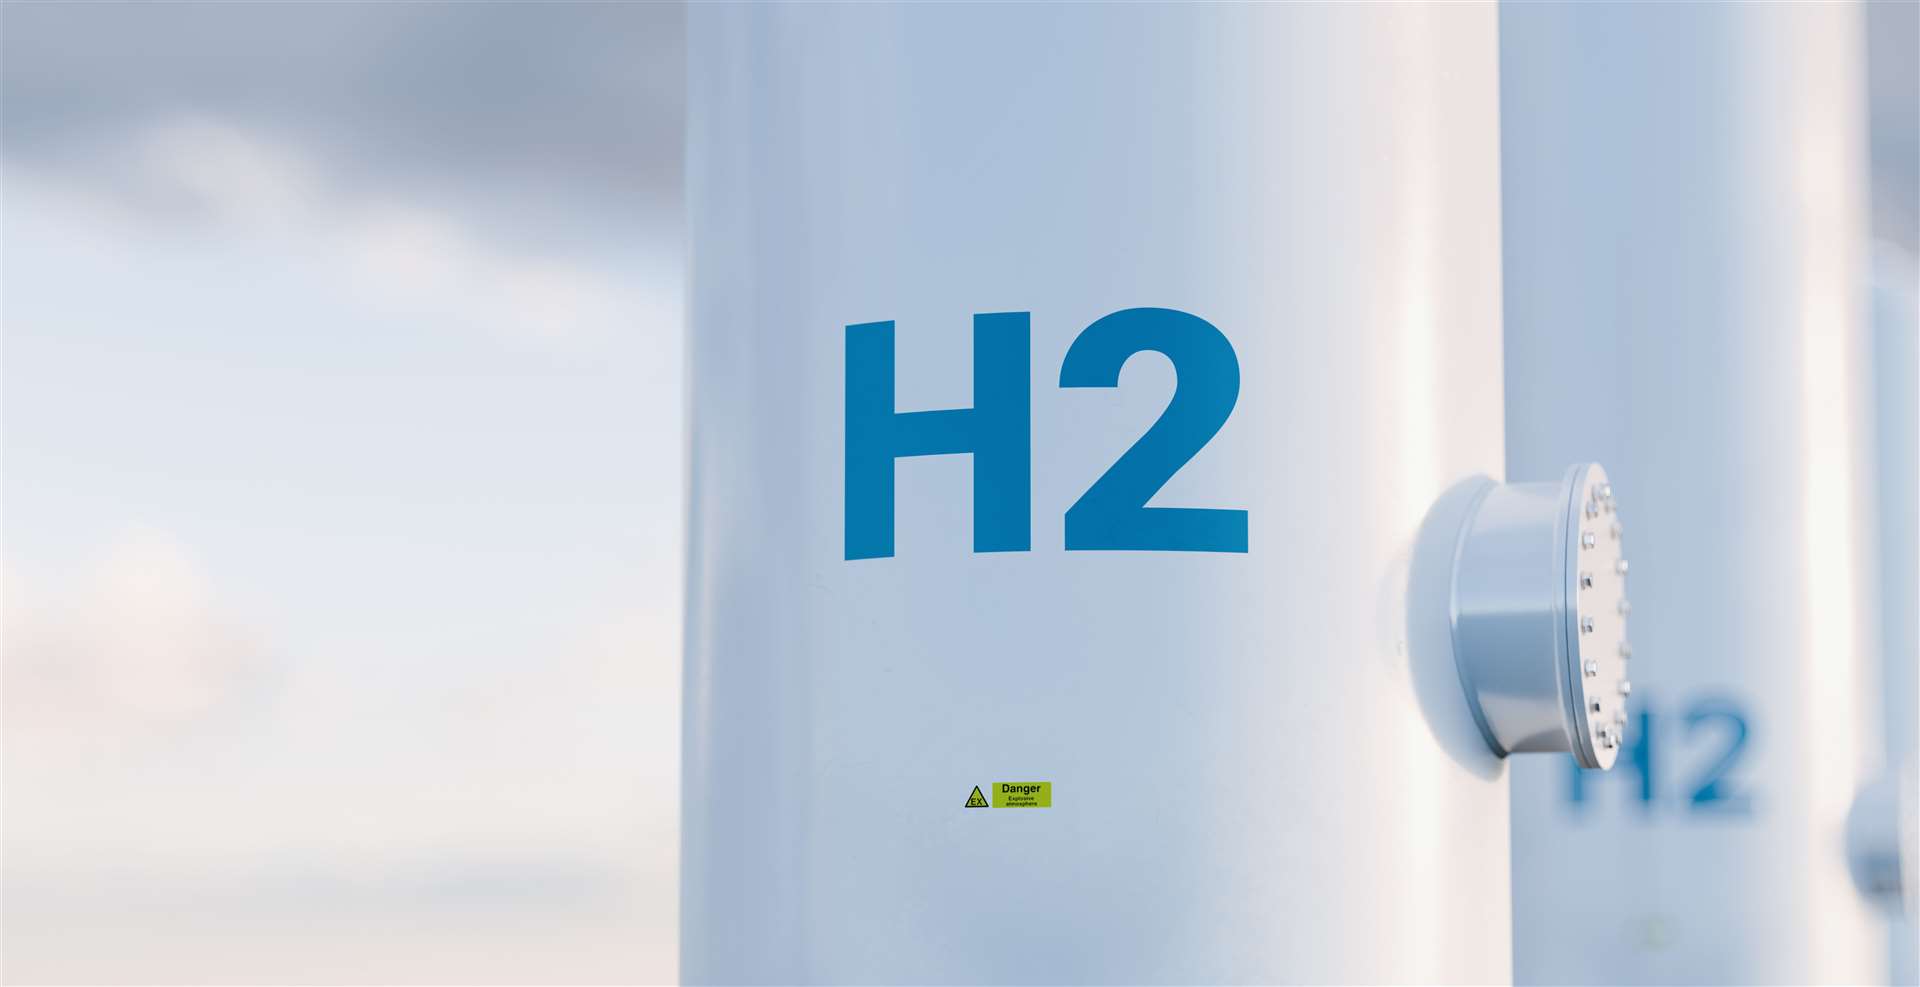 Hydrogen produced from renewable energy could be used in a number of areas.